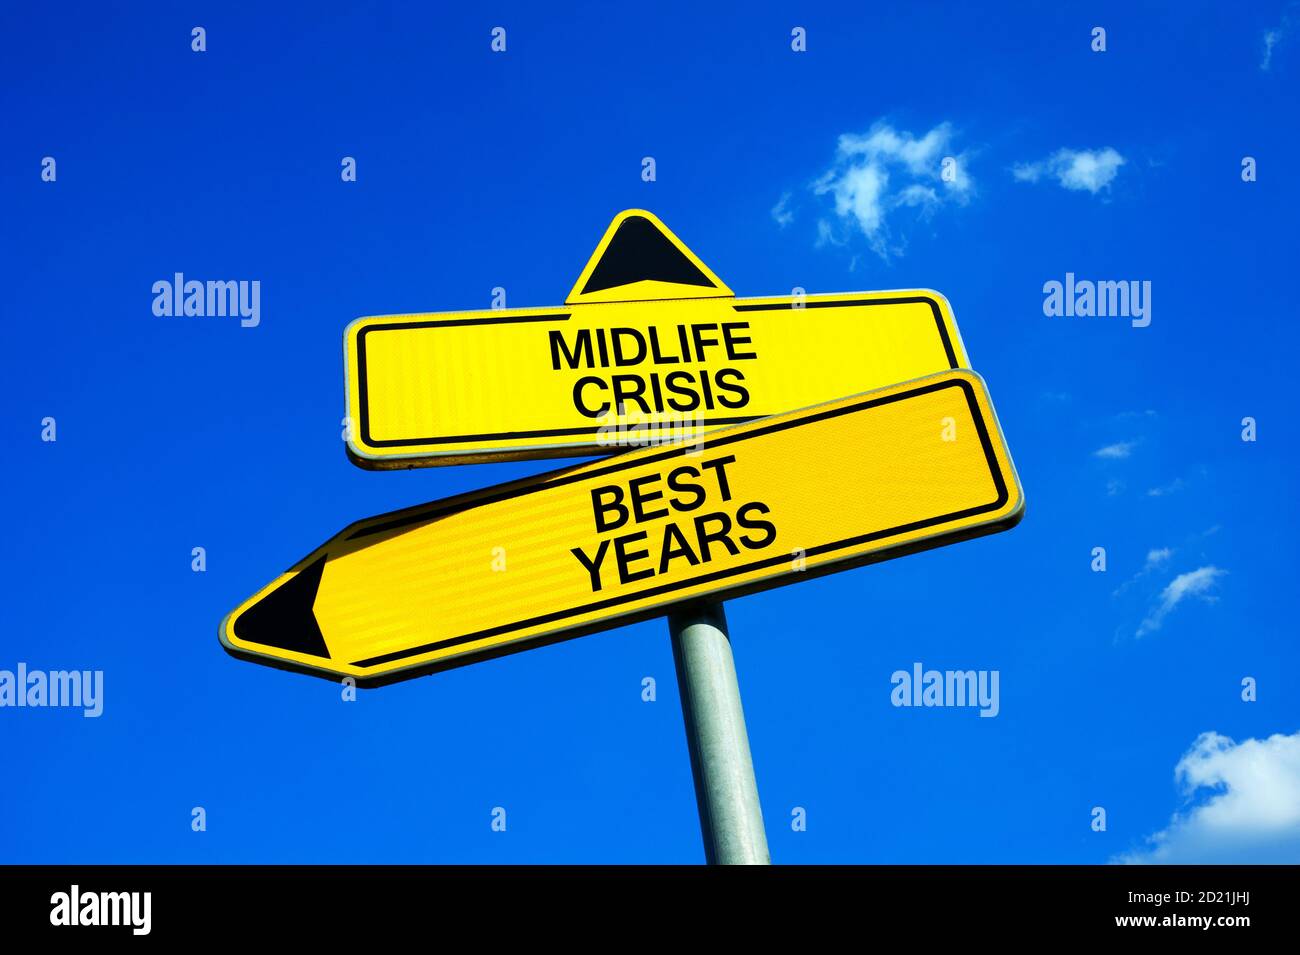 Midlife Crisis or Best Years - Traffic sign with two options - stress, misery and trouble because of middle age vs be positive and enjoy life during o Stock Photo